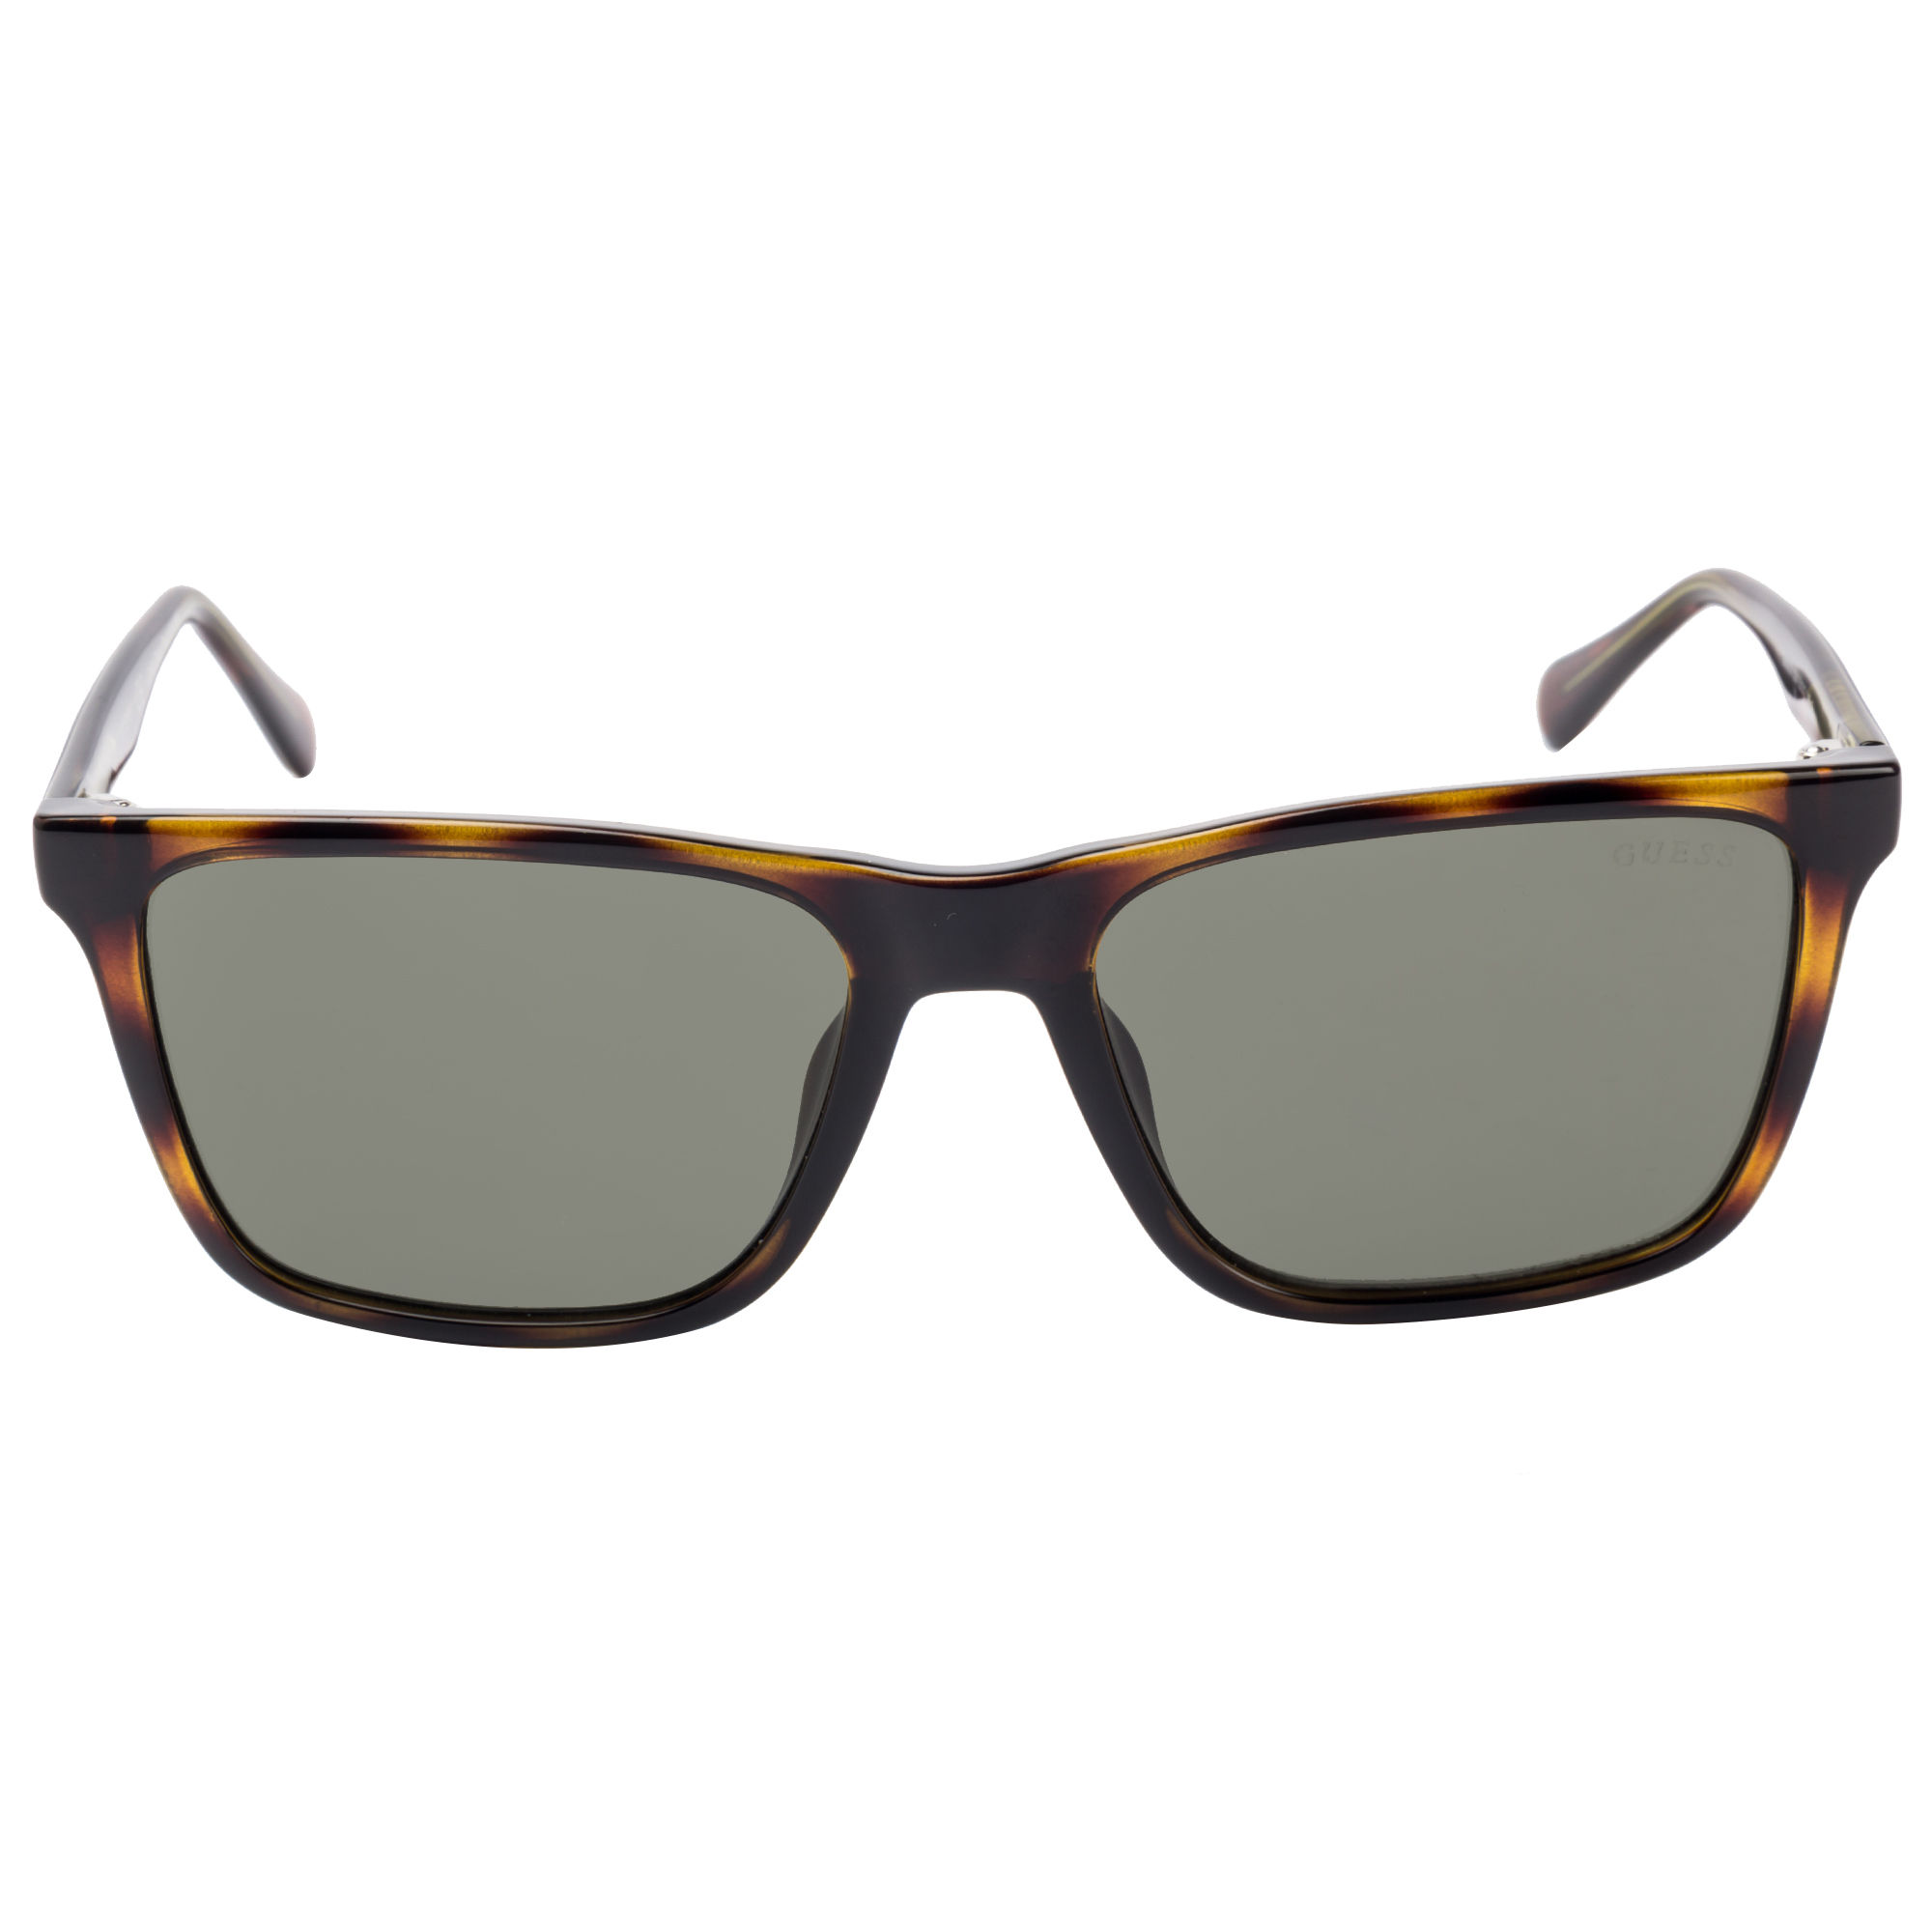 Guess Sunglasses Retro Square With Green Lens For Men